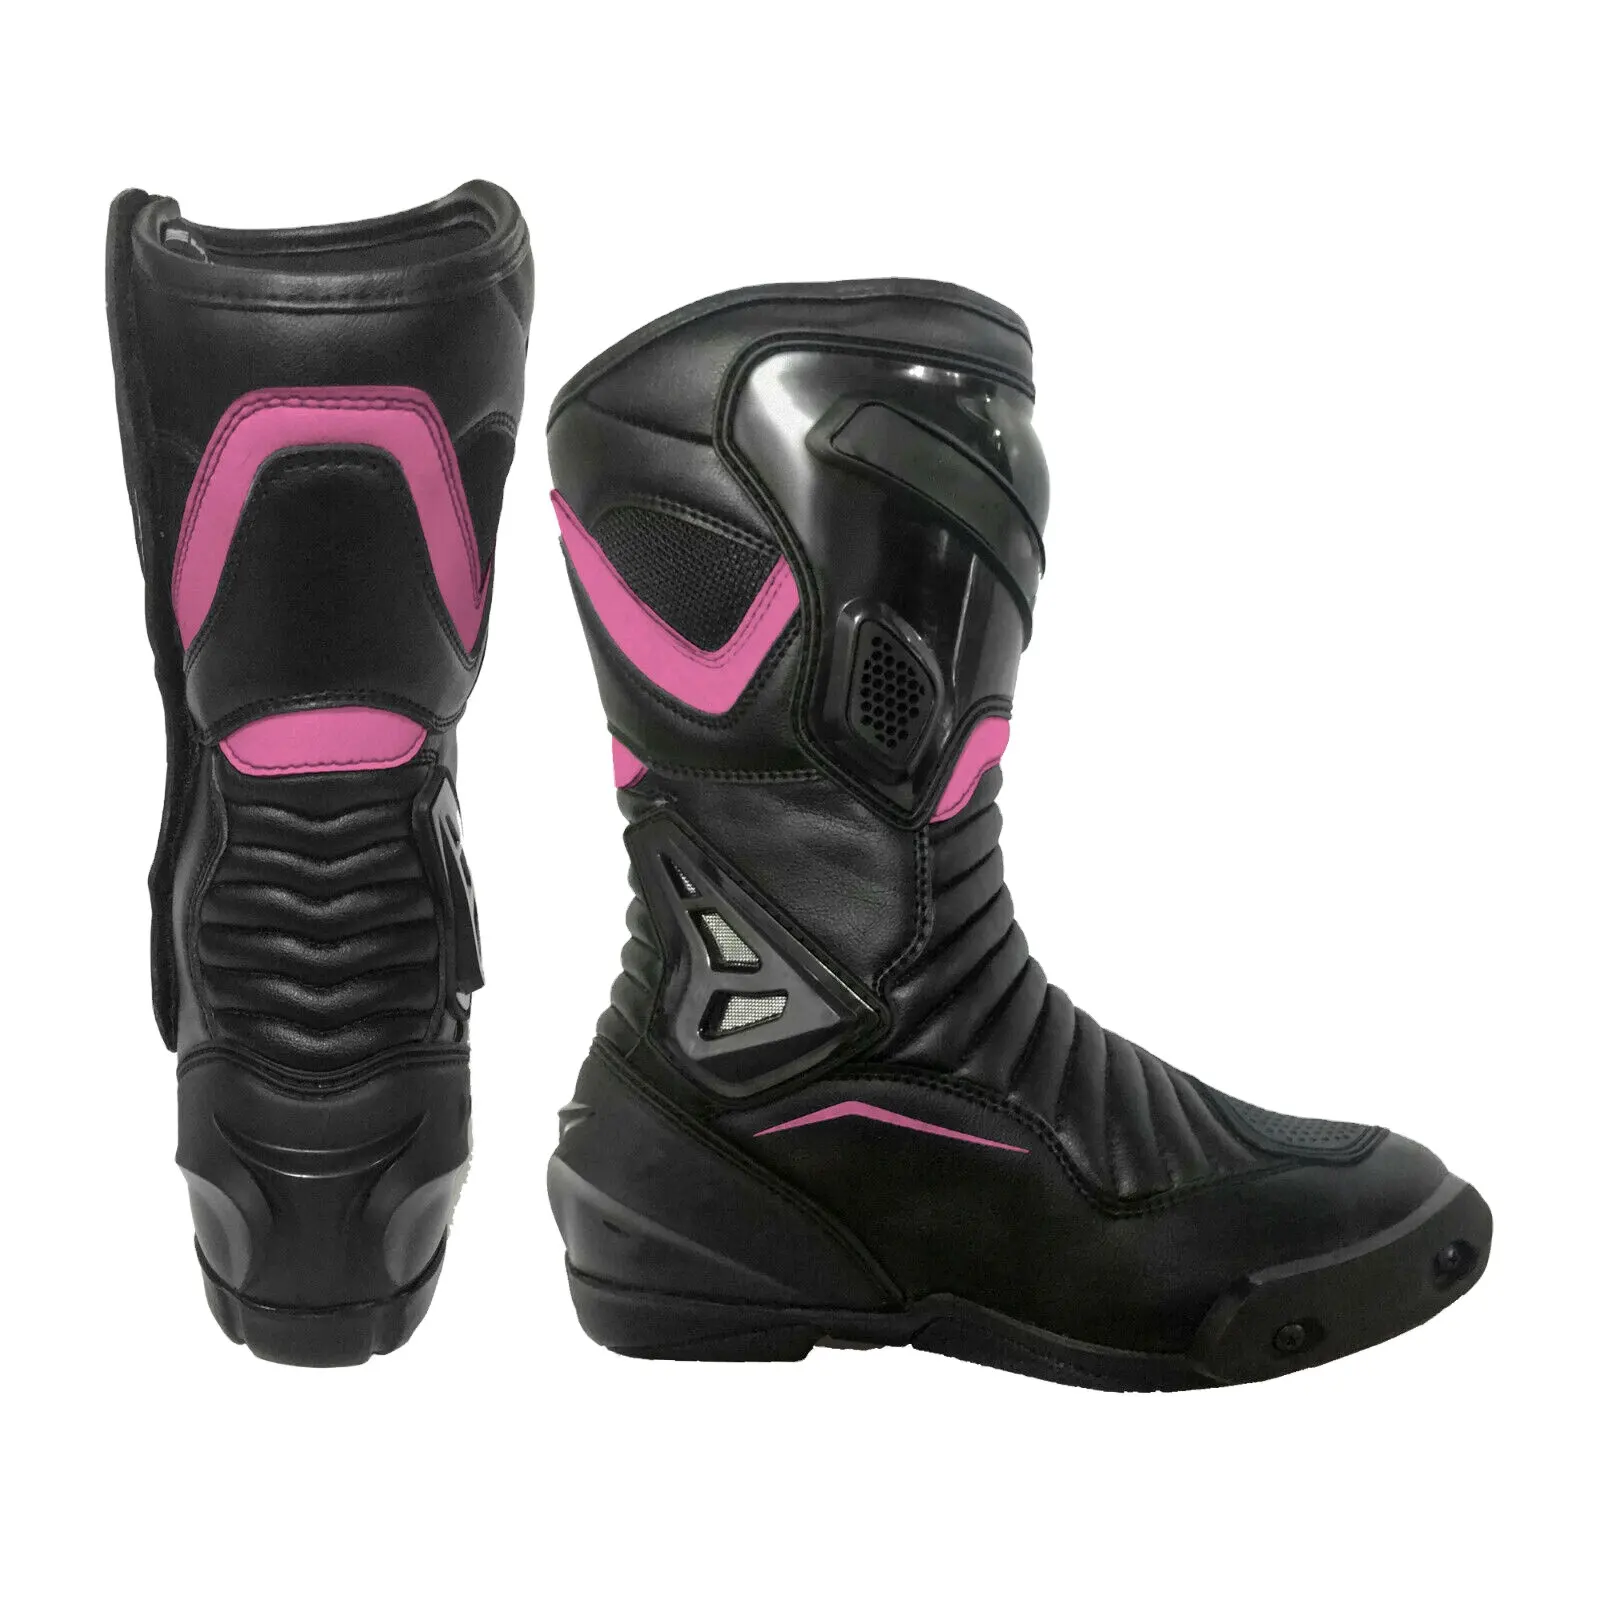 Womens Motorbike Leather Shoes Waterproof Motorcycle Ladies Racing Boot new design safest motorcycle shoes